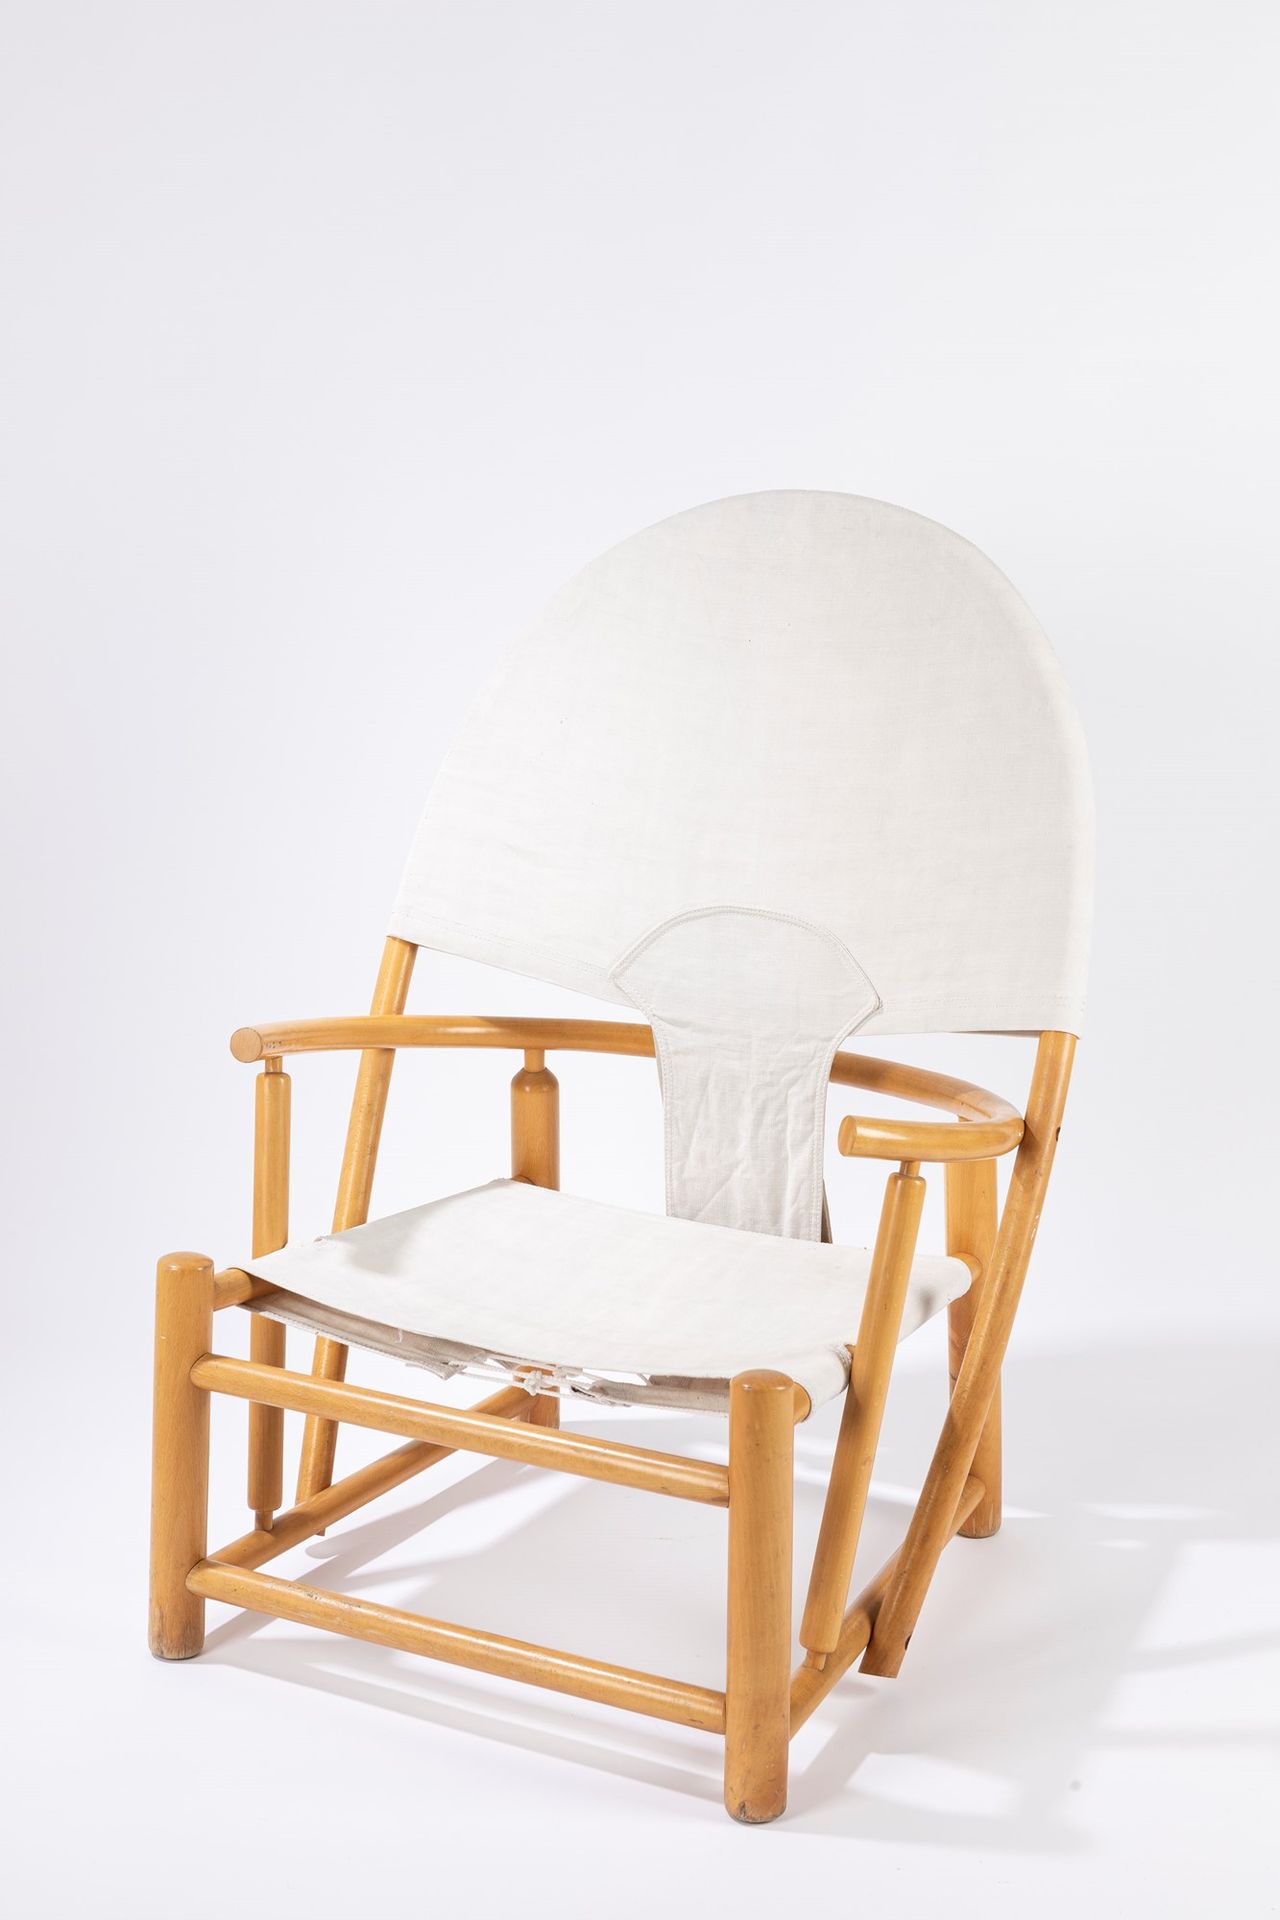 Piero Palange e Werther Toffoloni Hoop G23, 1970 ca.

Cm 77x66x103
armchair with&hellip;